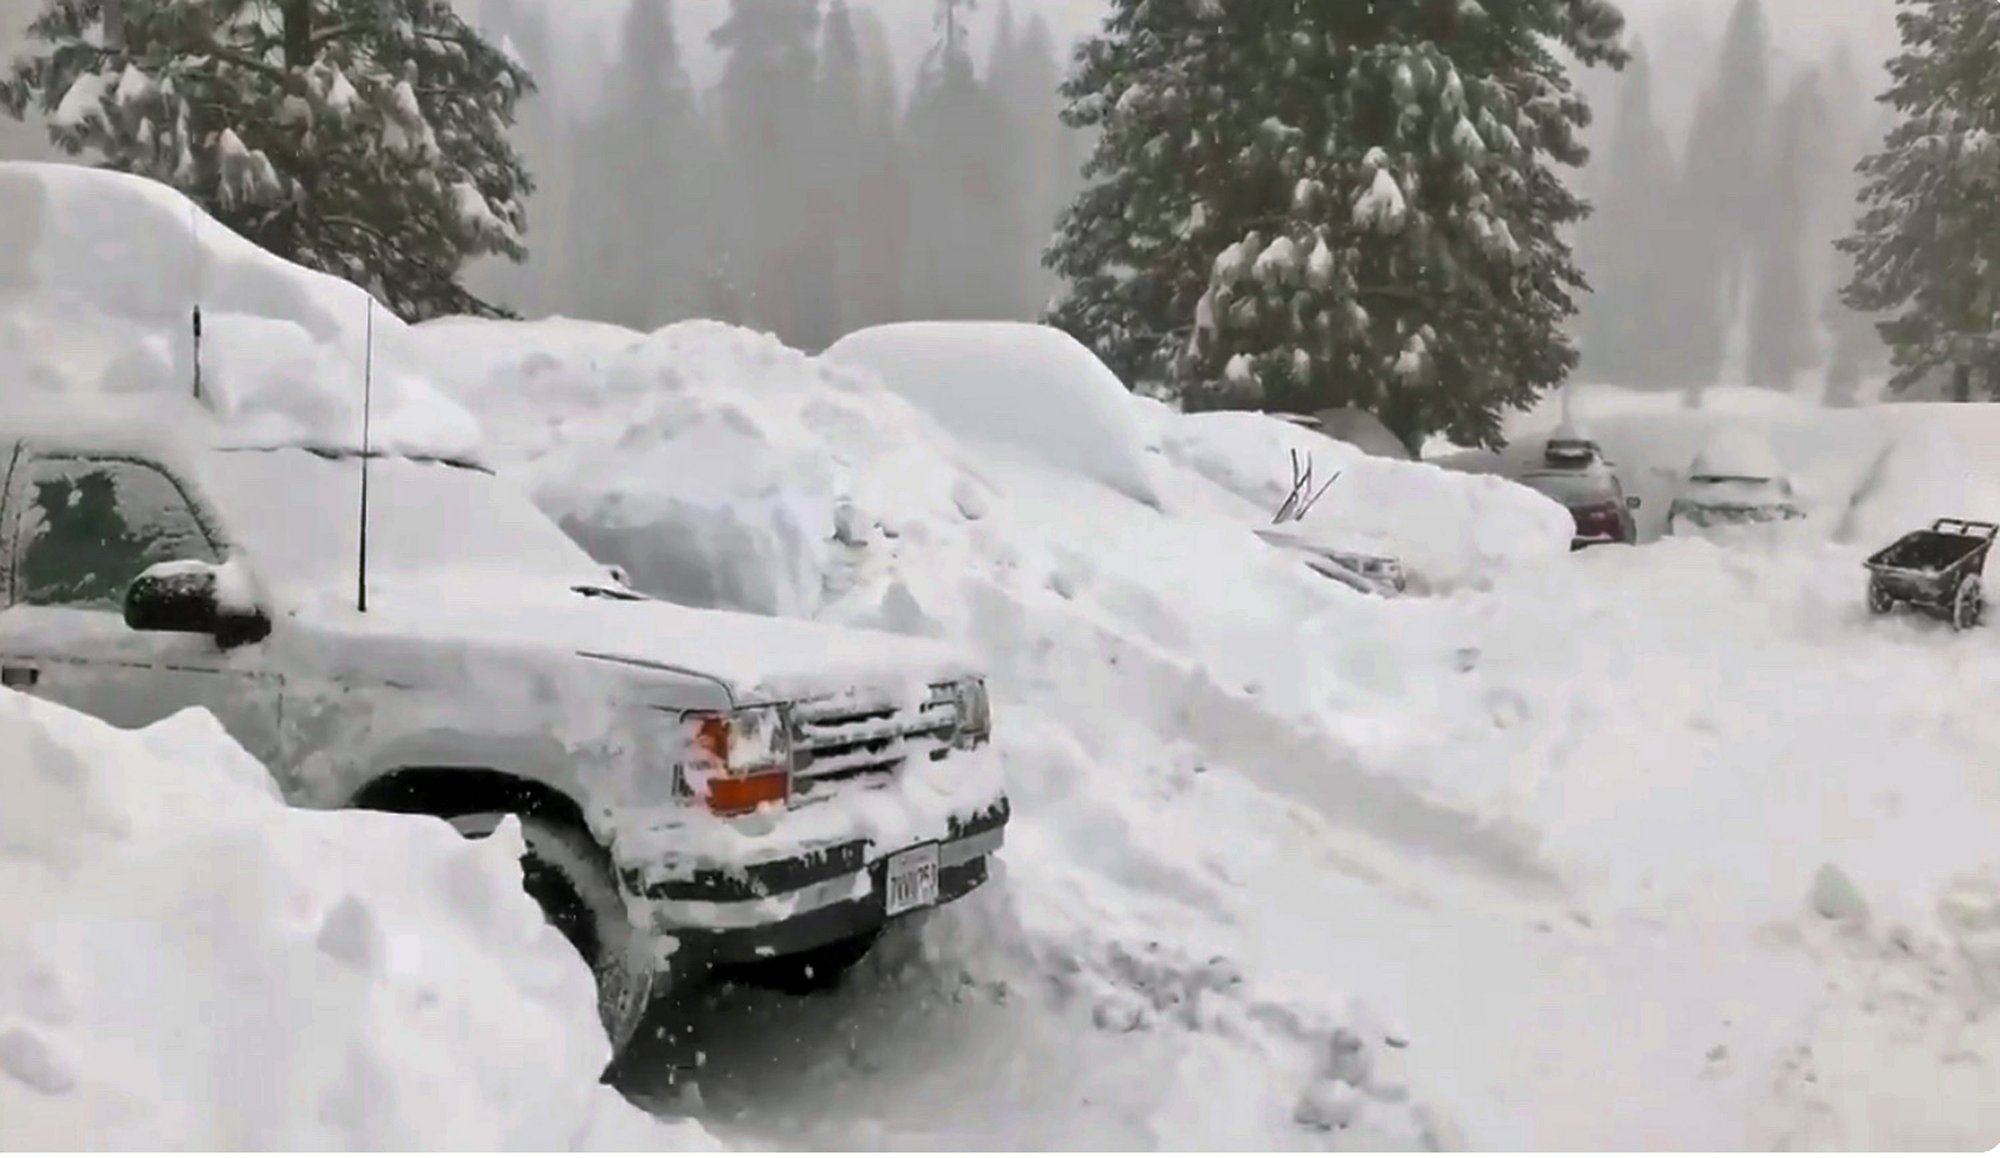 In California, the snow storm caught off guard 120 people, cutting them